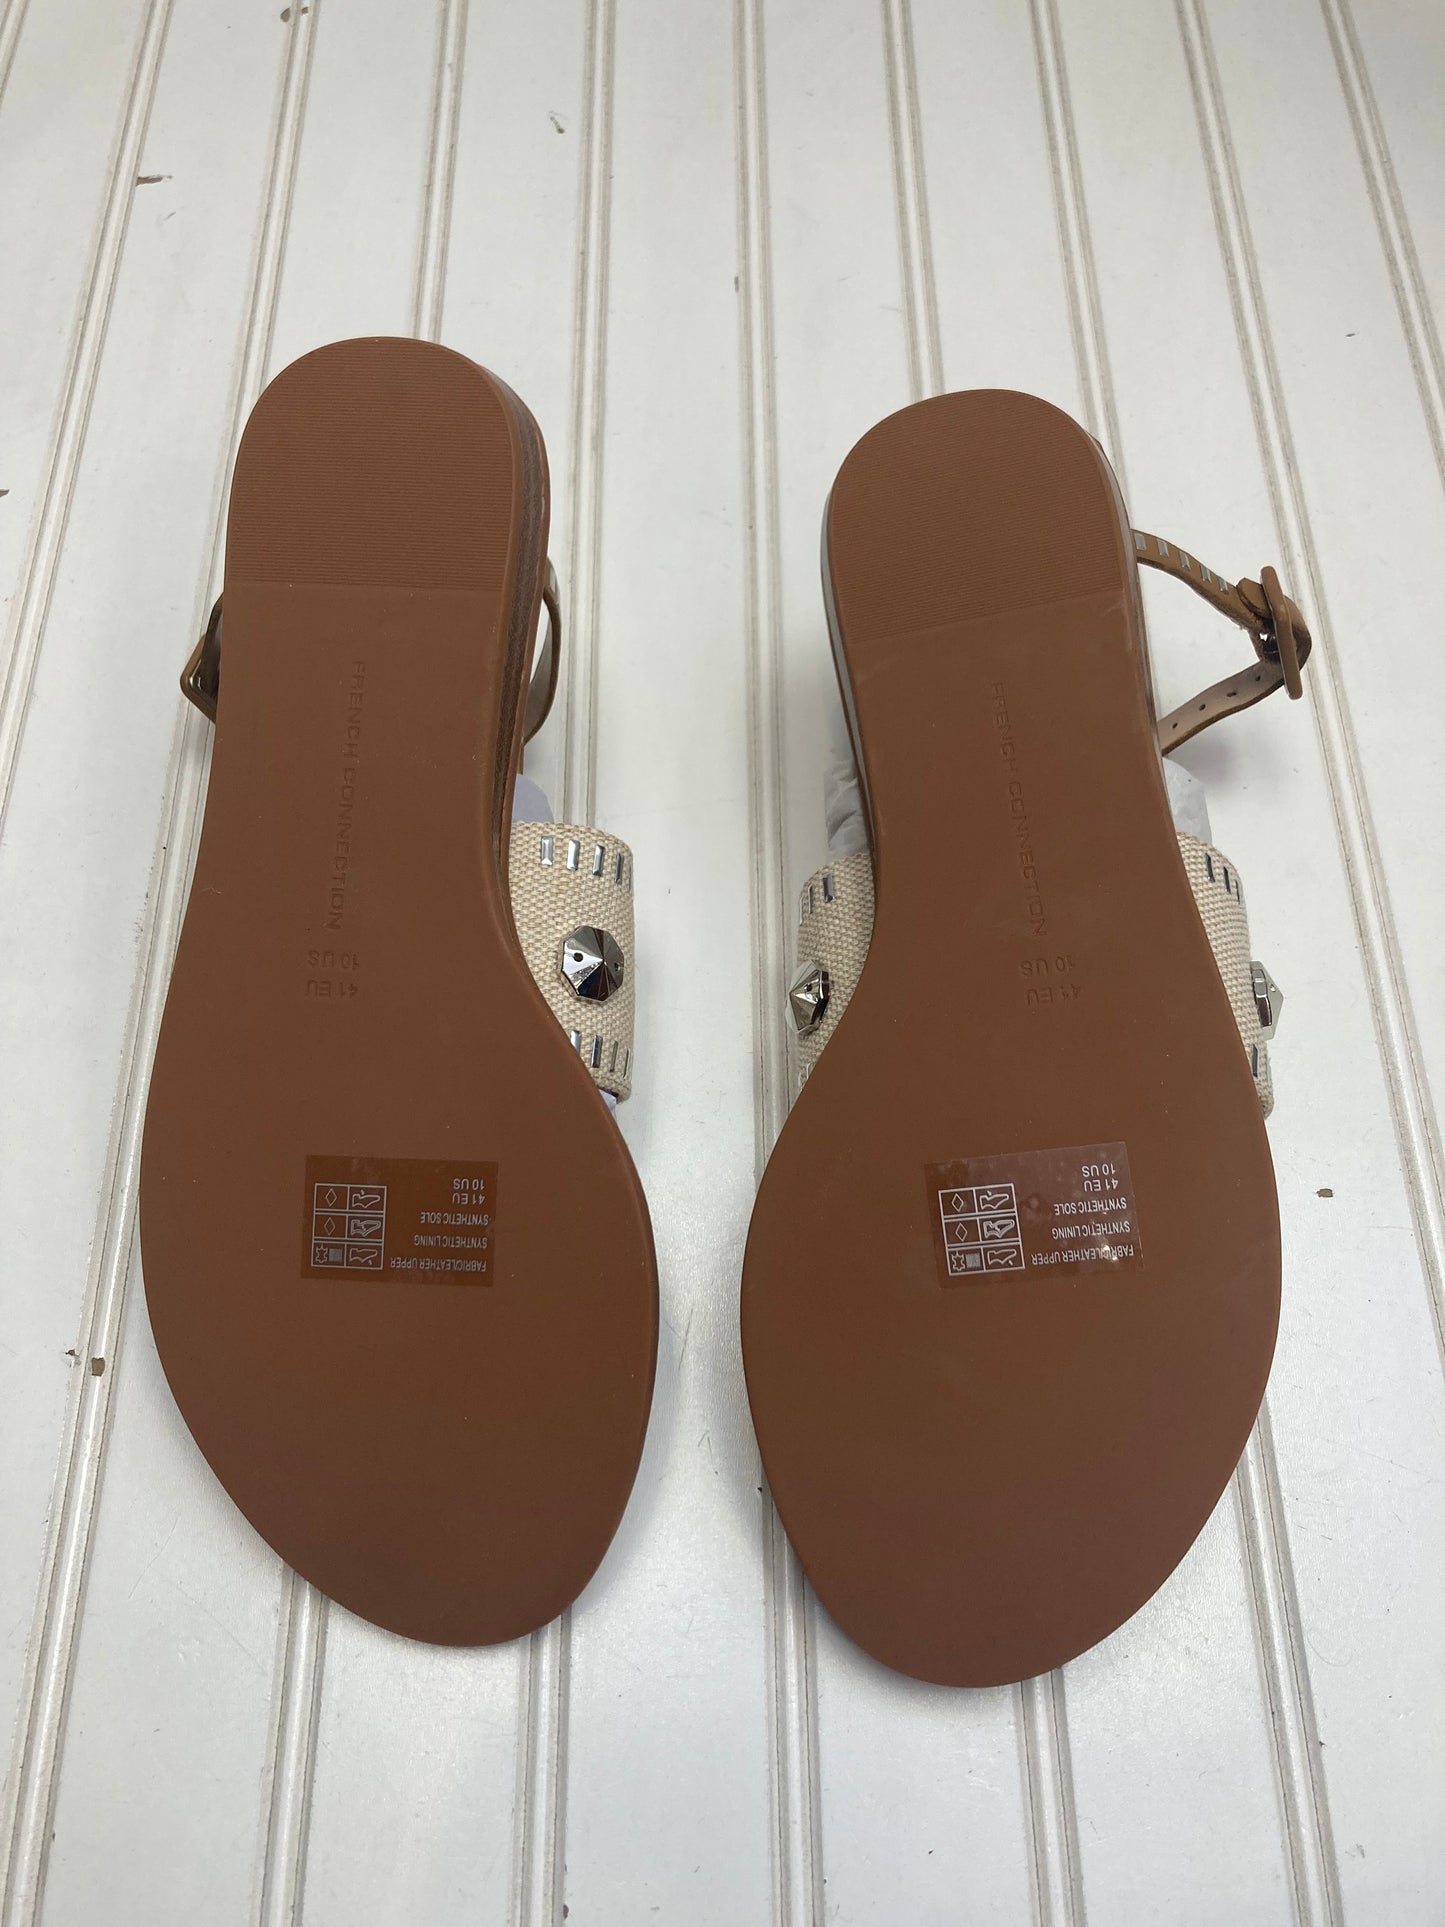 Sandals Flats By French Connection  Size: 10